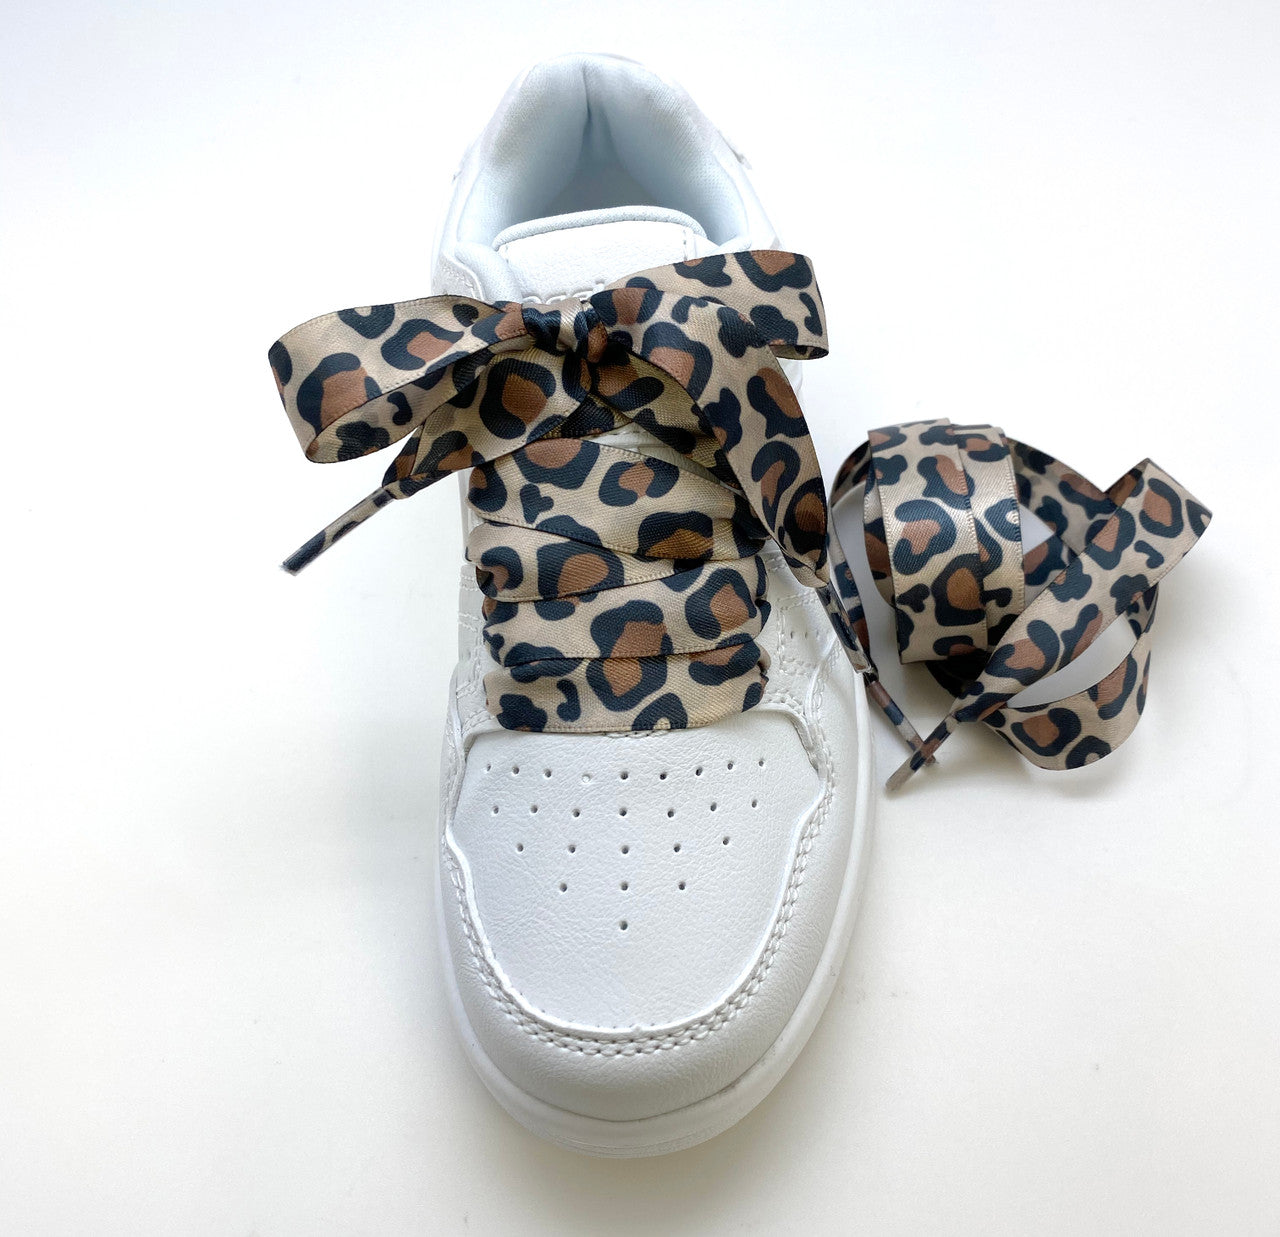 Lace your shoes with  our fun leopard print!